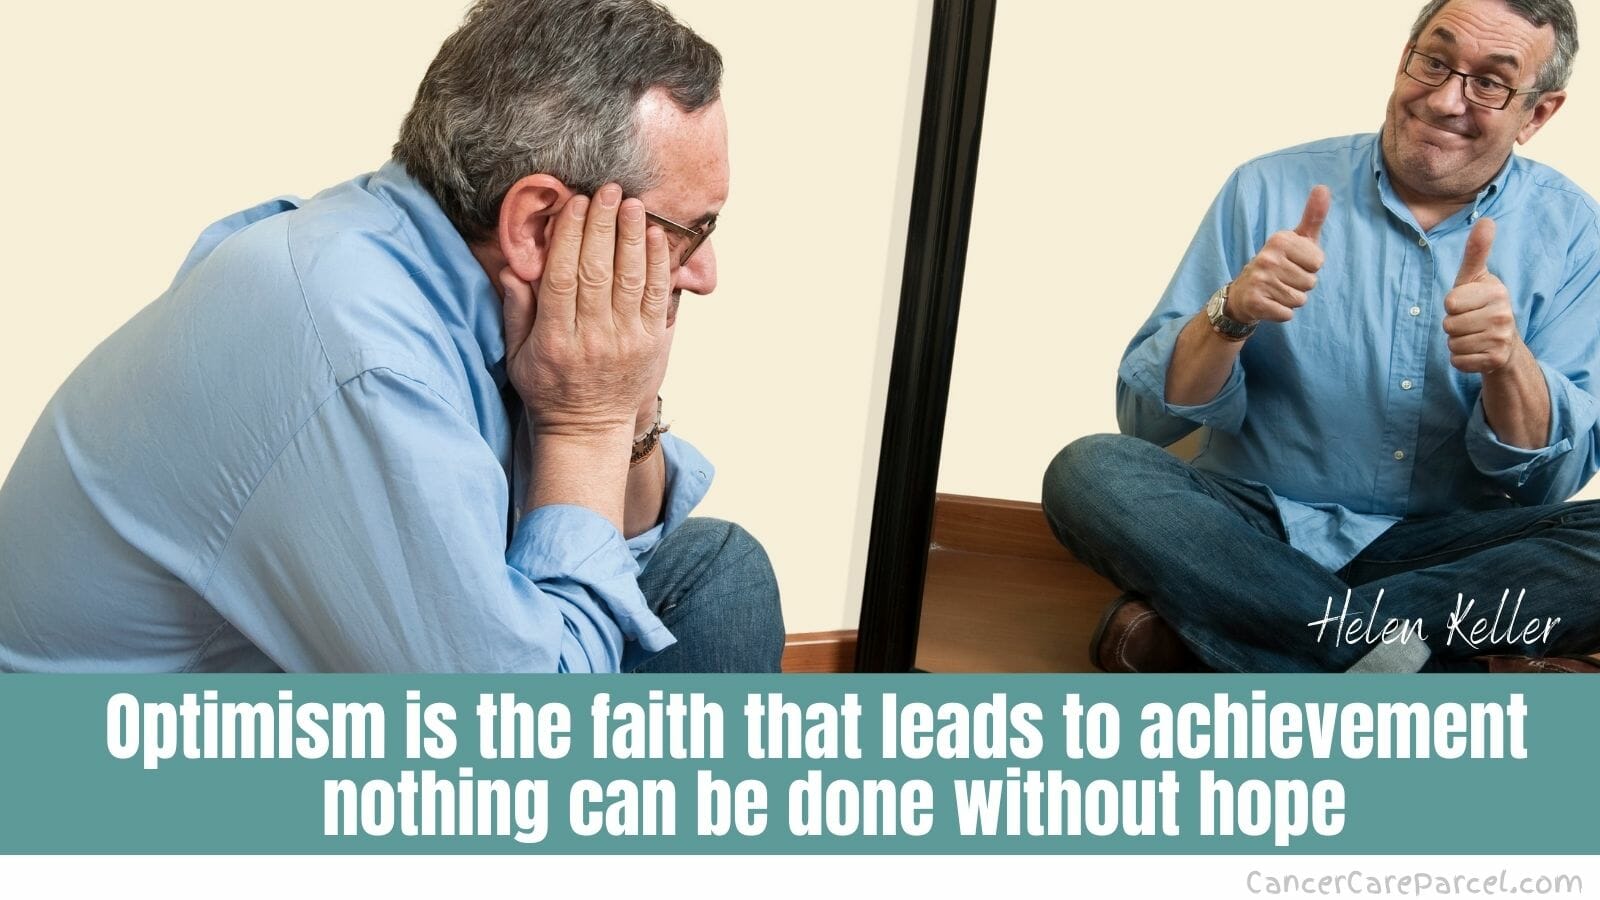 Optimism is the faith that leads to achievement nothing can be done without hope